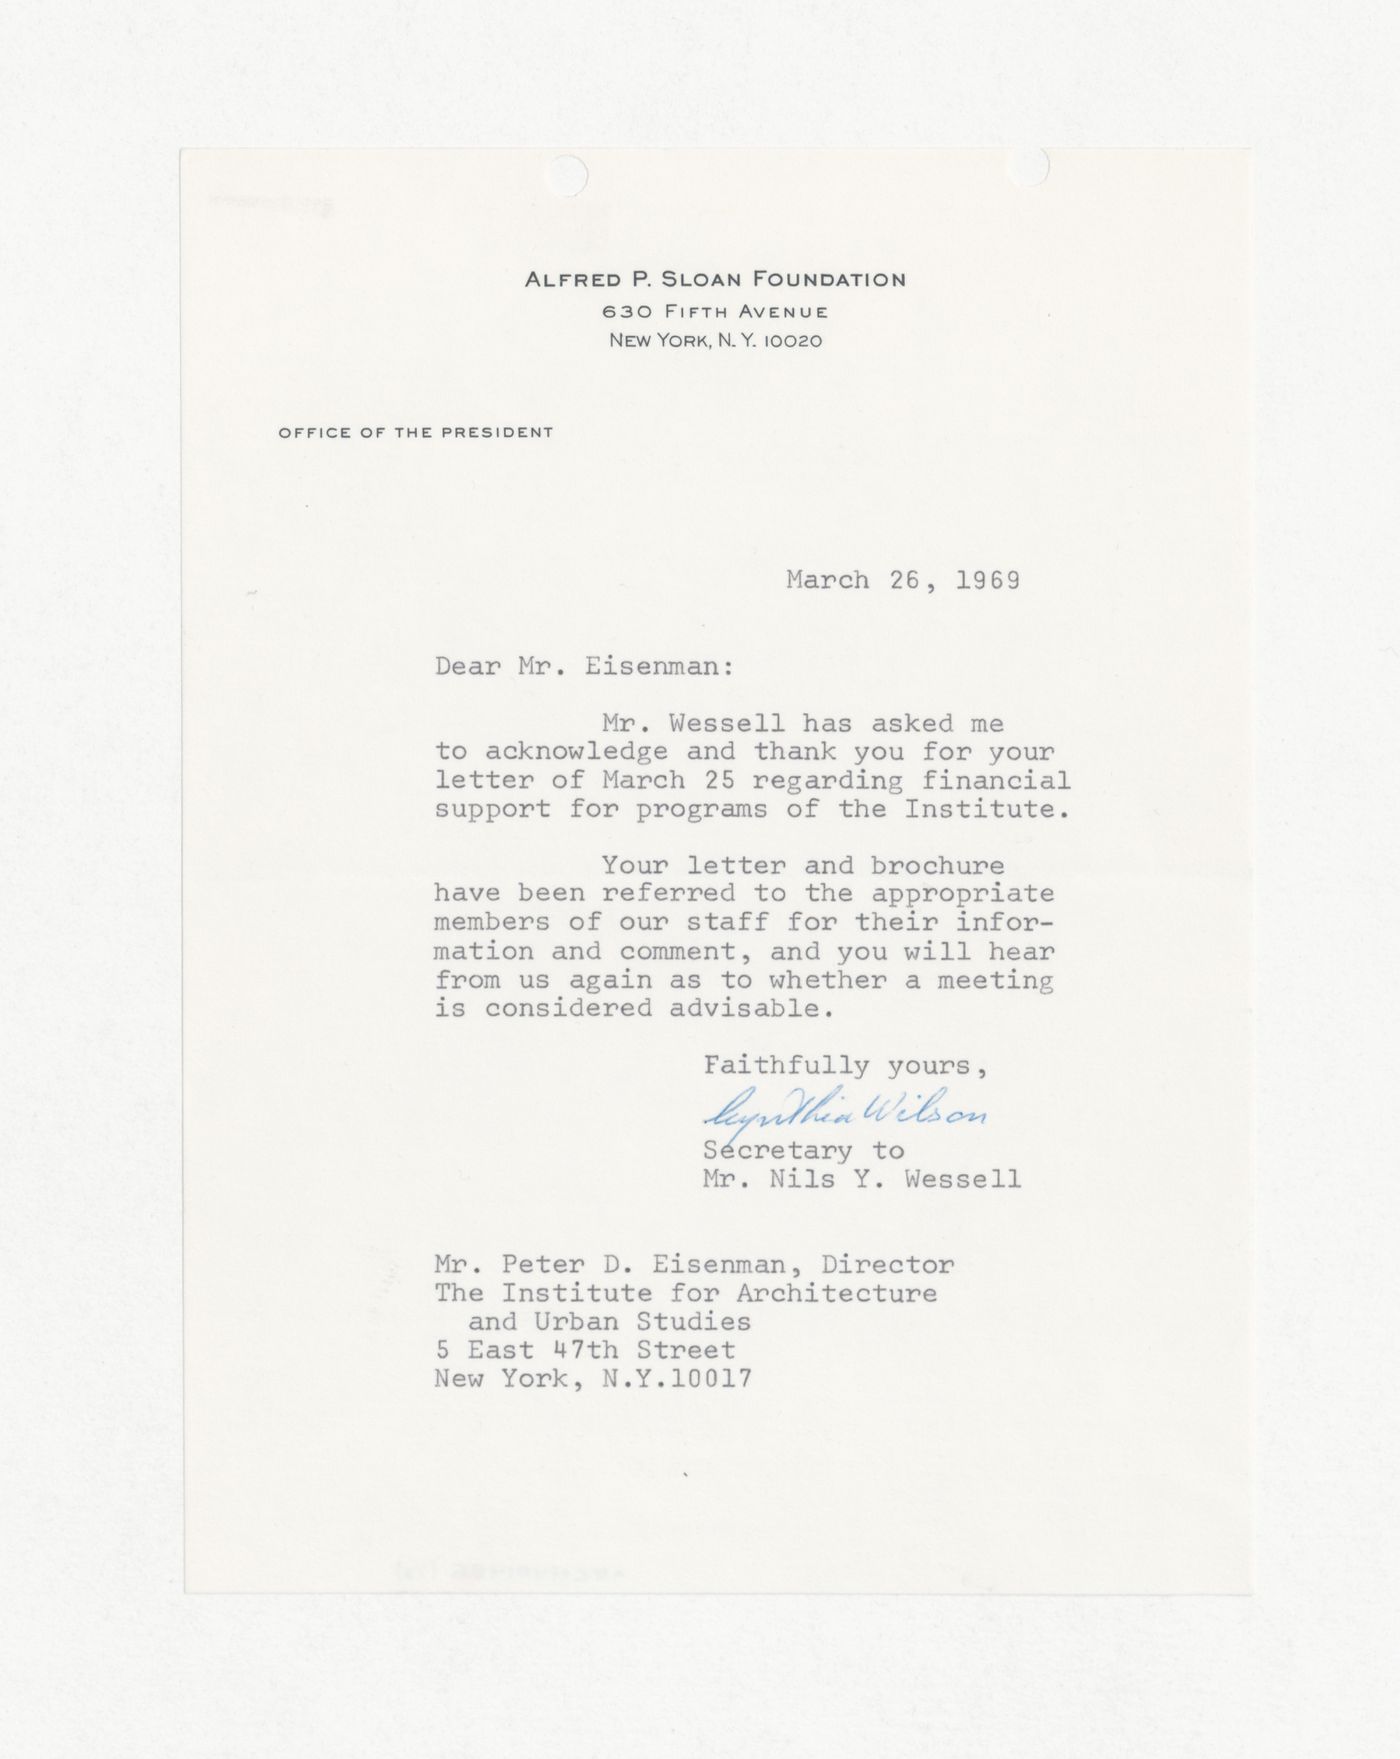 Letter from Cynthia Wilson to Peter D. Eisenman with attached copy of letter from Peter D. Eisenman requesting a donation with annotations